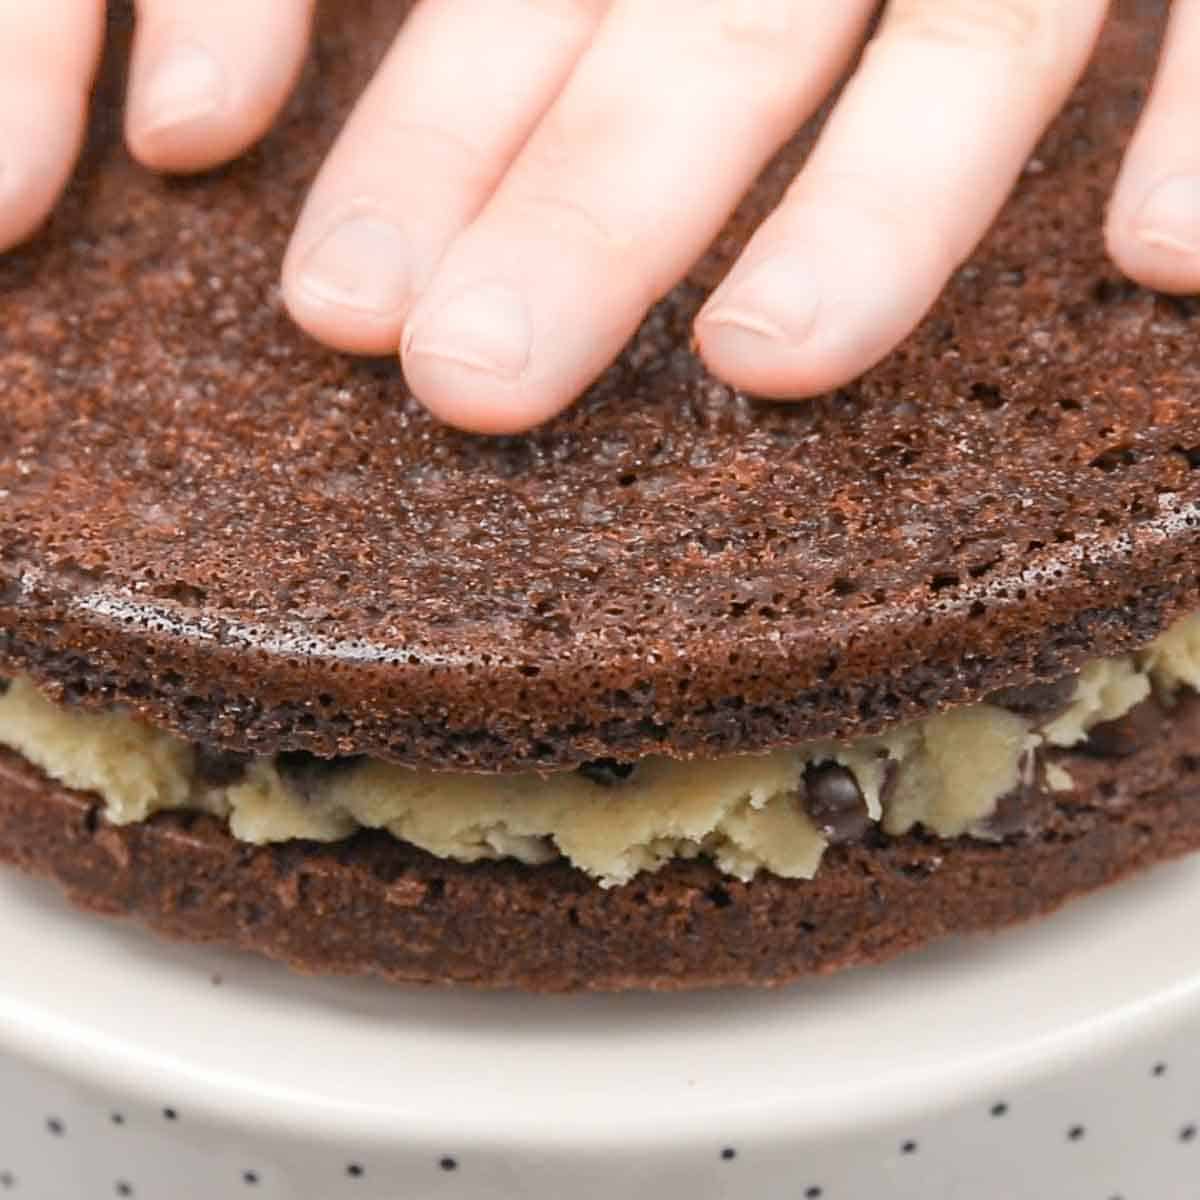 A person's hand on top of a brownie cake